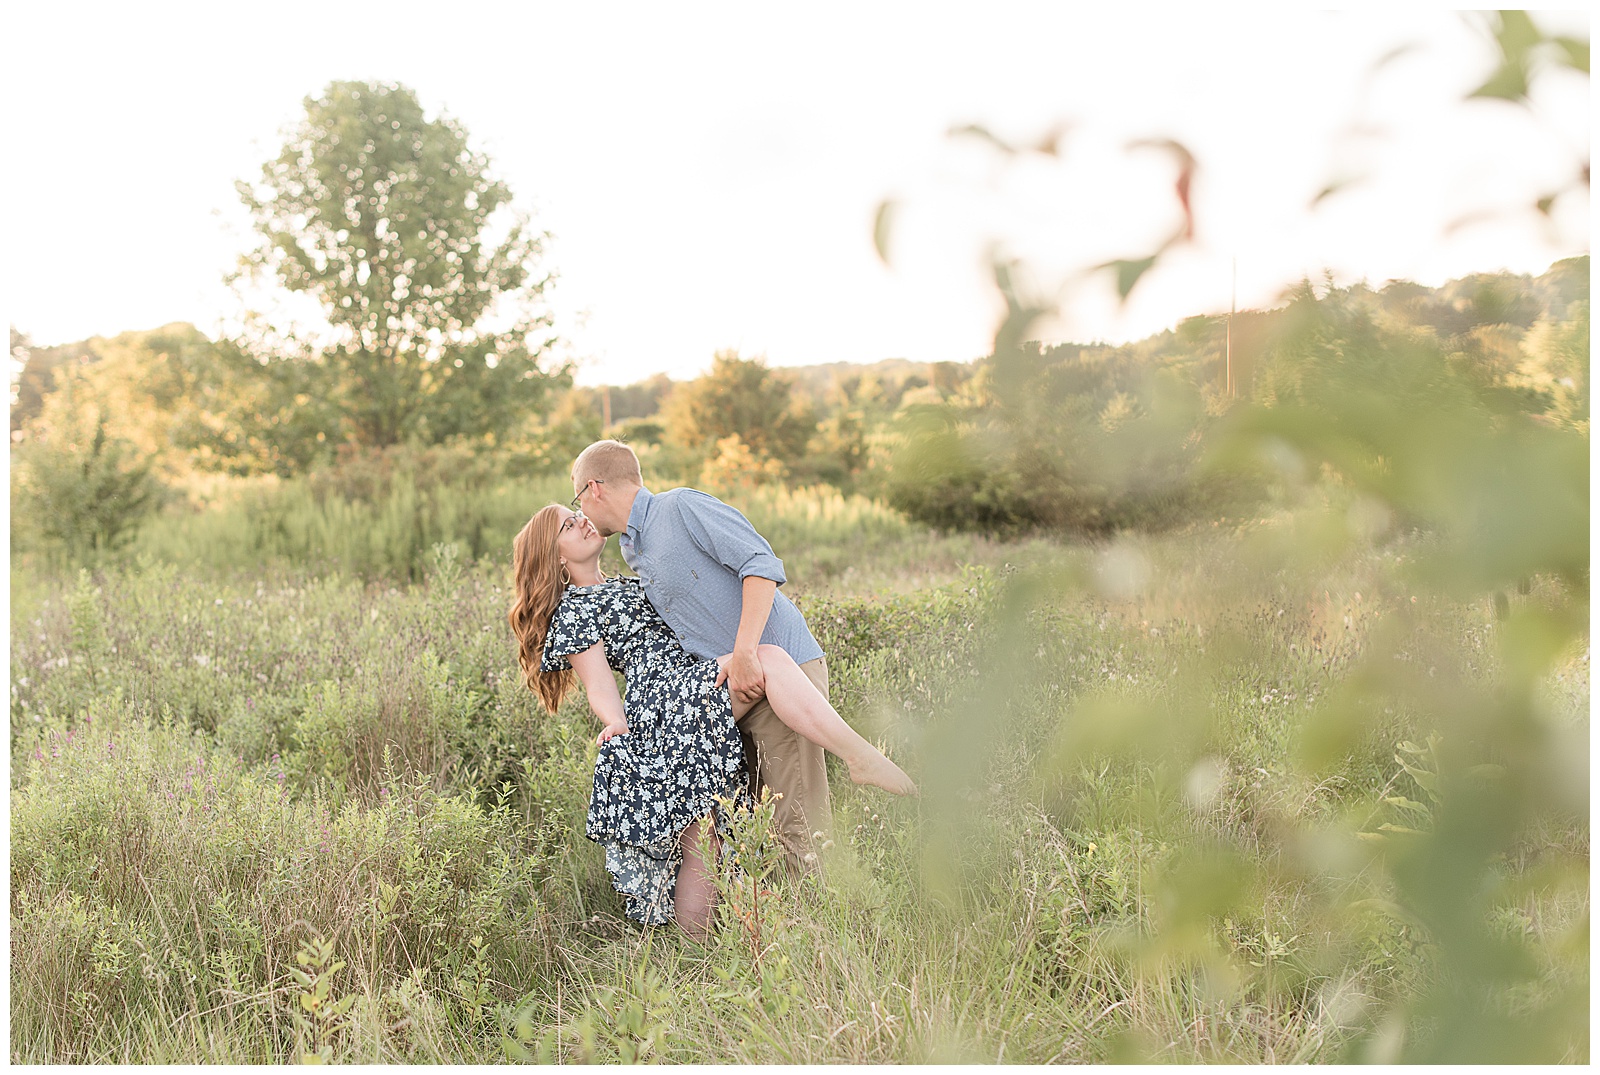 guy in blue shirt and Khakis dipping girl in navy blue floral dress surrounded by tall wild grasses